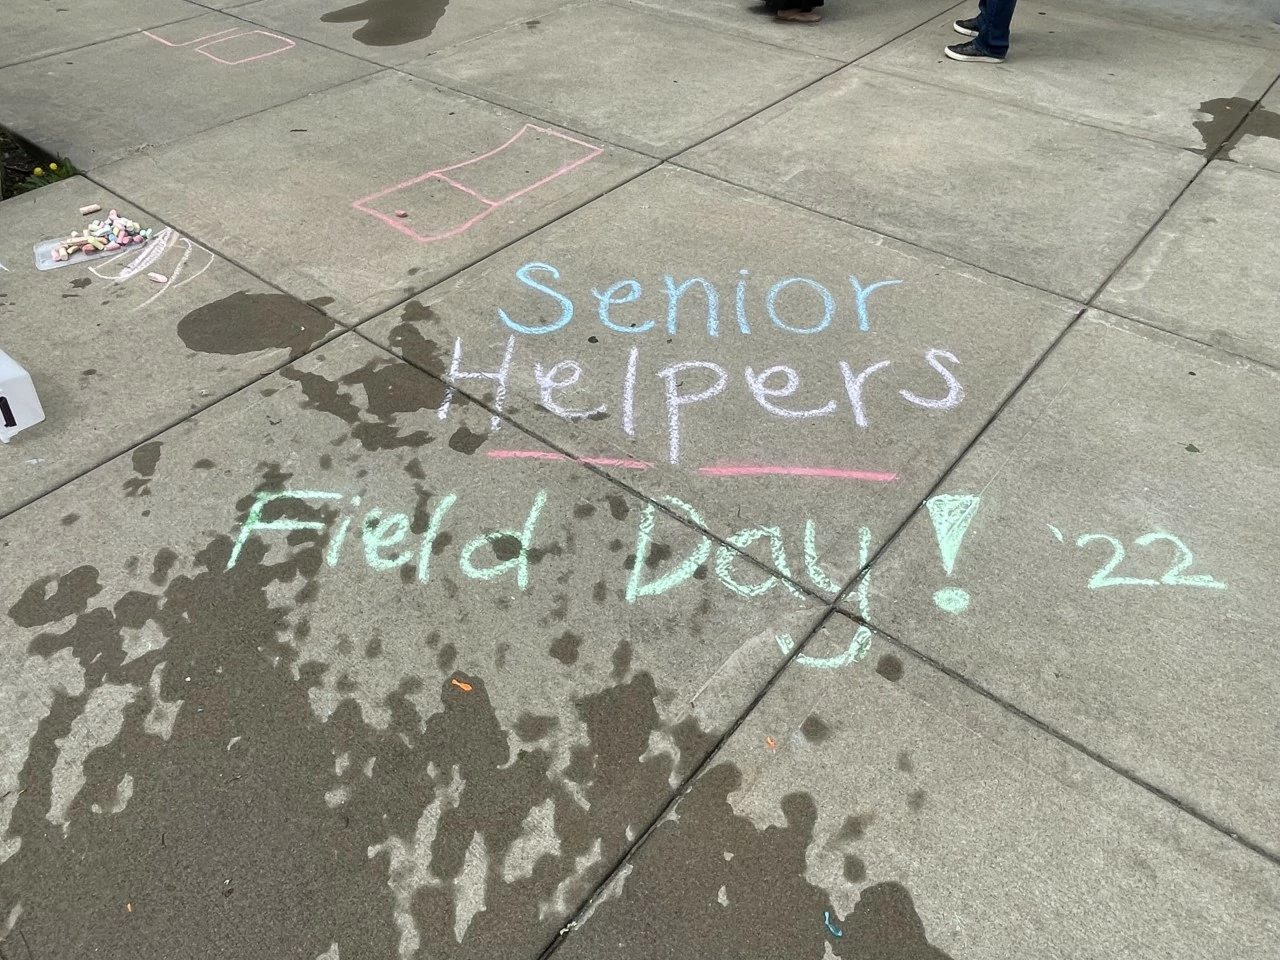 Our first Senior Helpers event was a success! Thank you to all of our caregivers and clients who made this day possible.